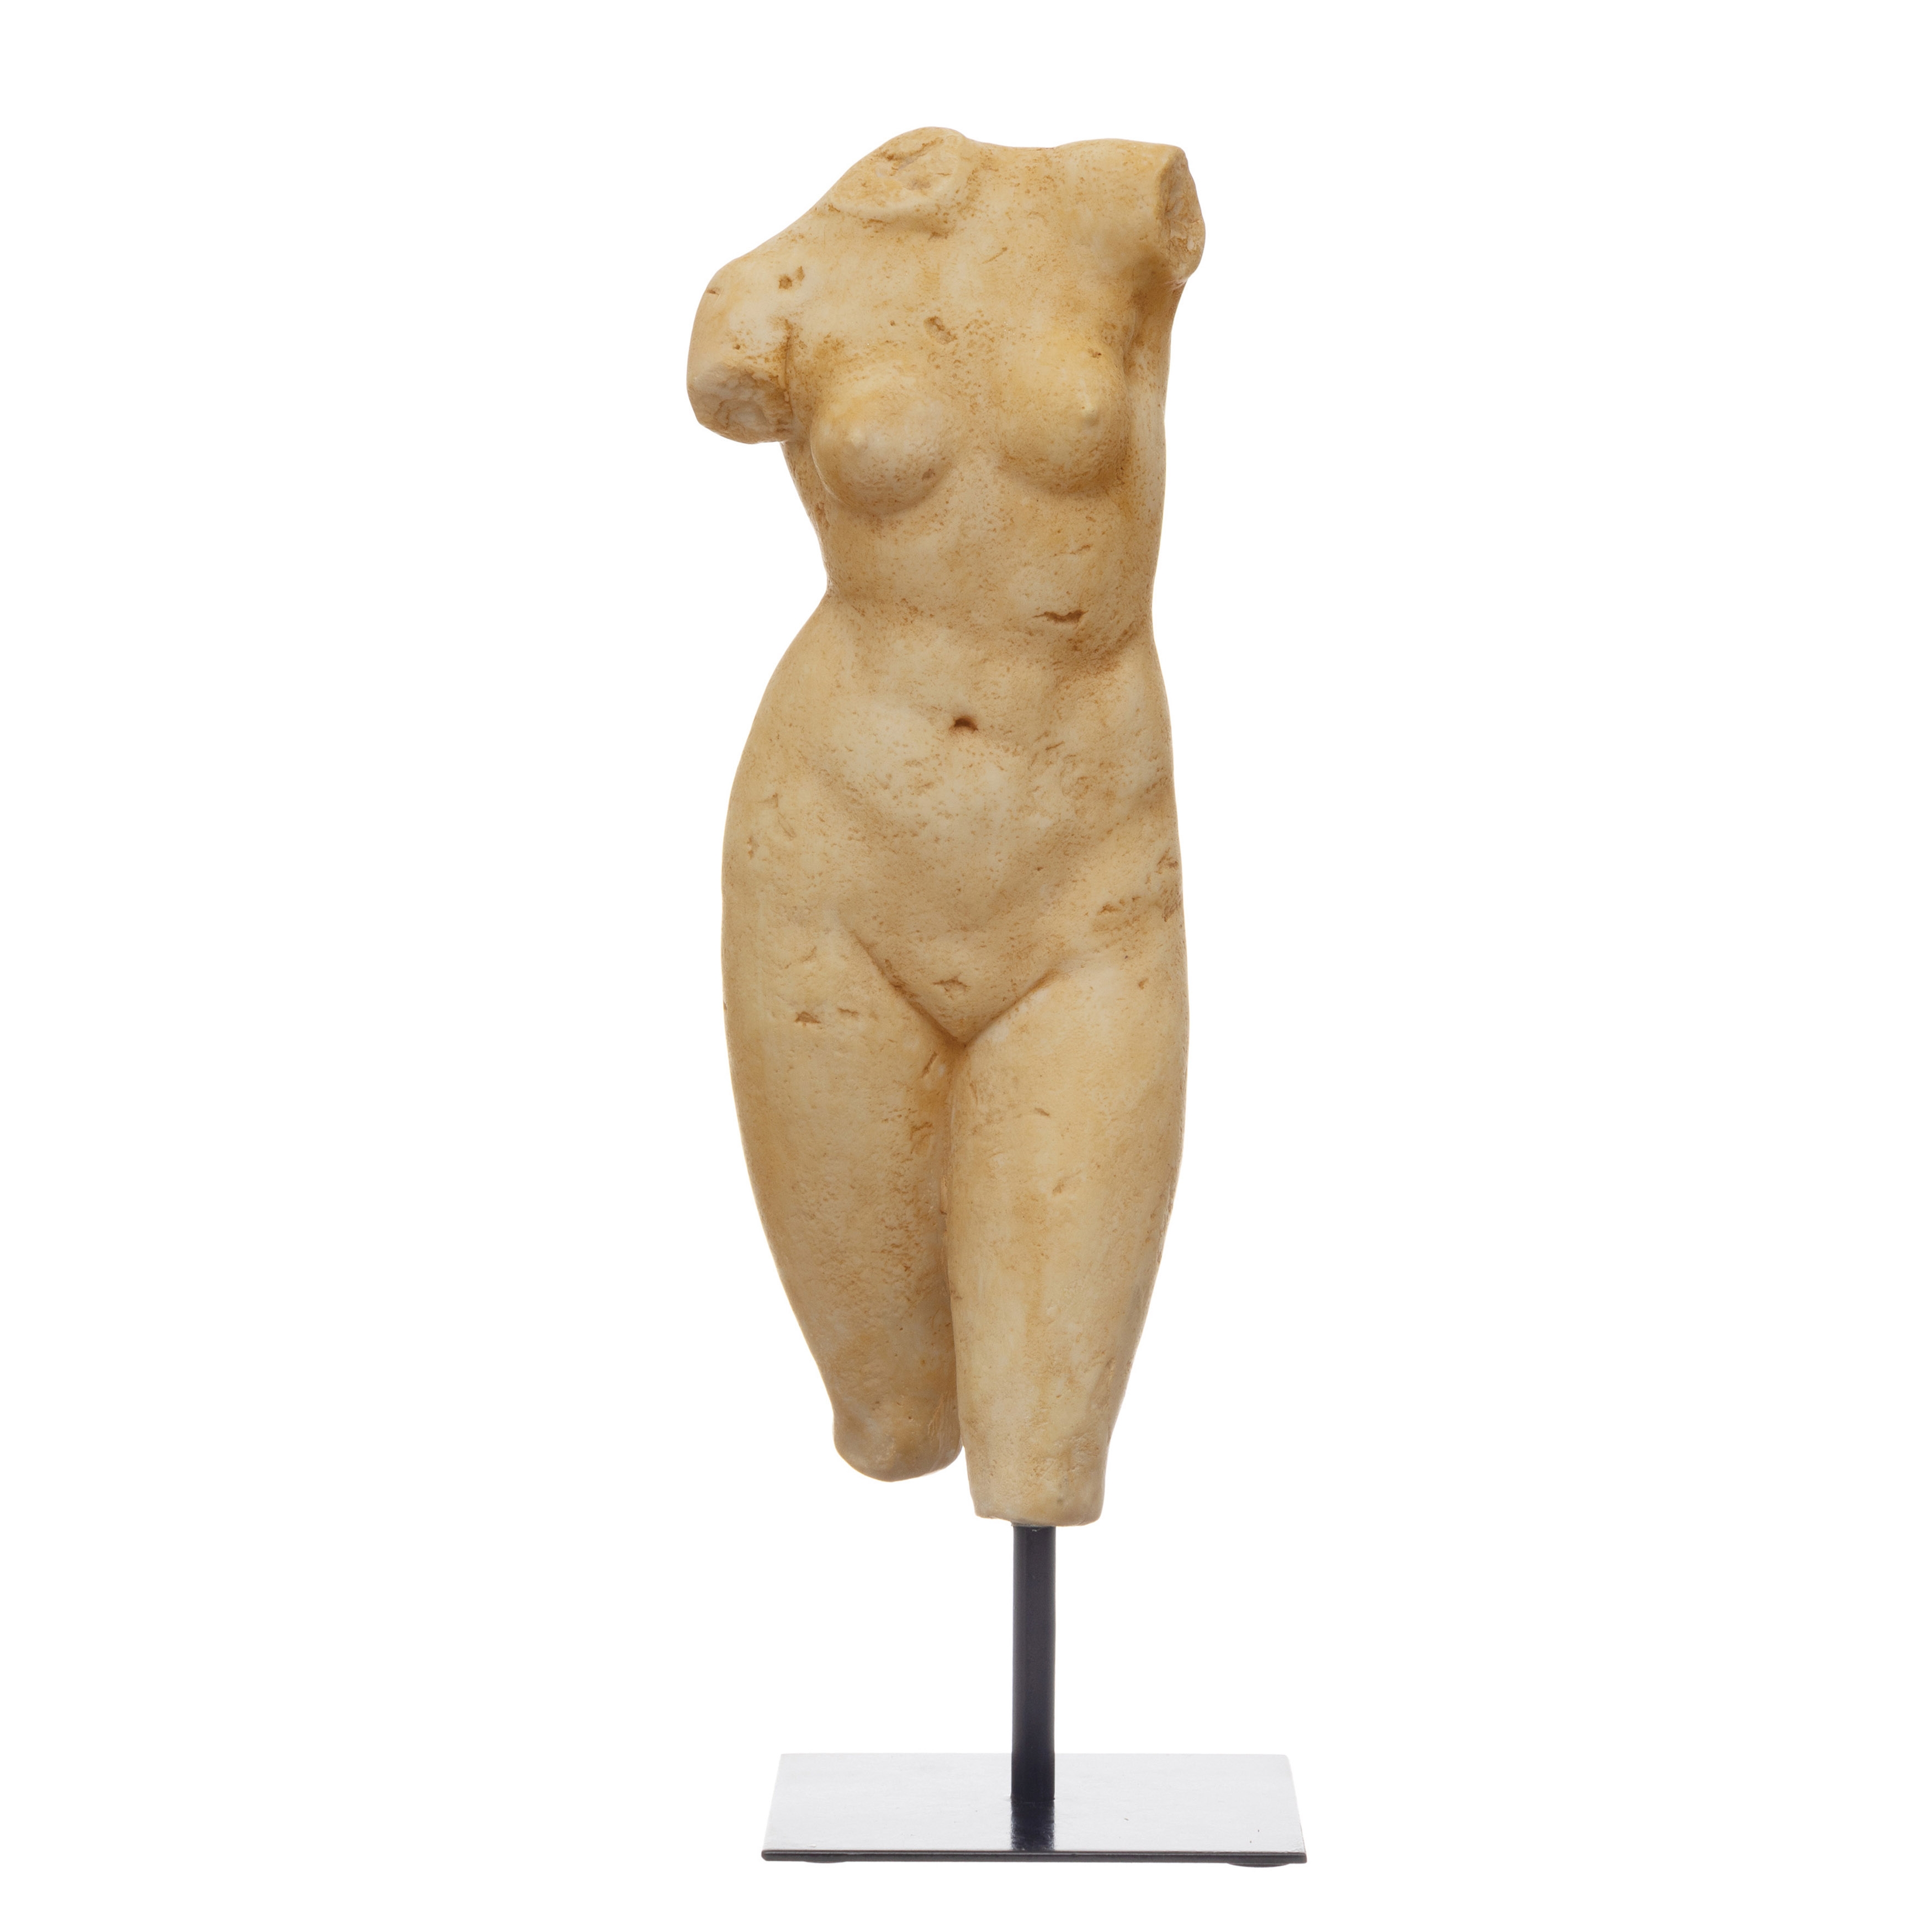 Resin Female Body Figure on Metal Stand, Plaster Finish - Image 0